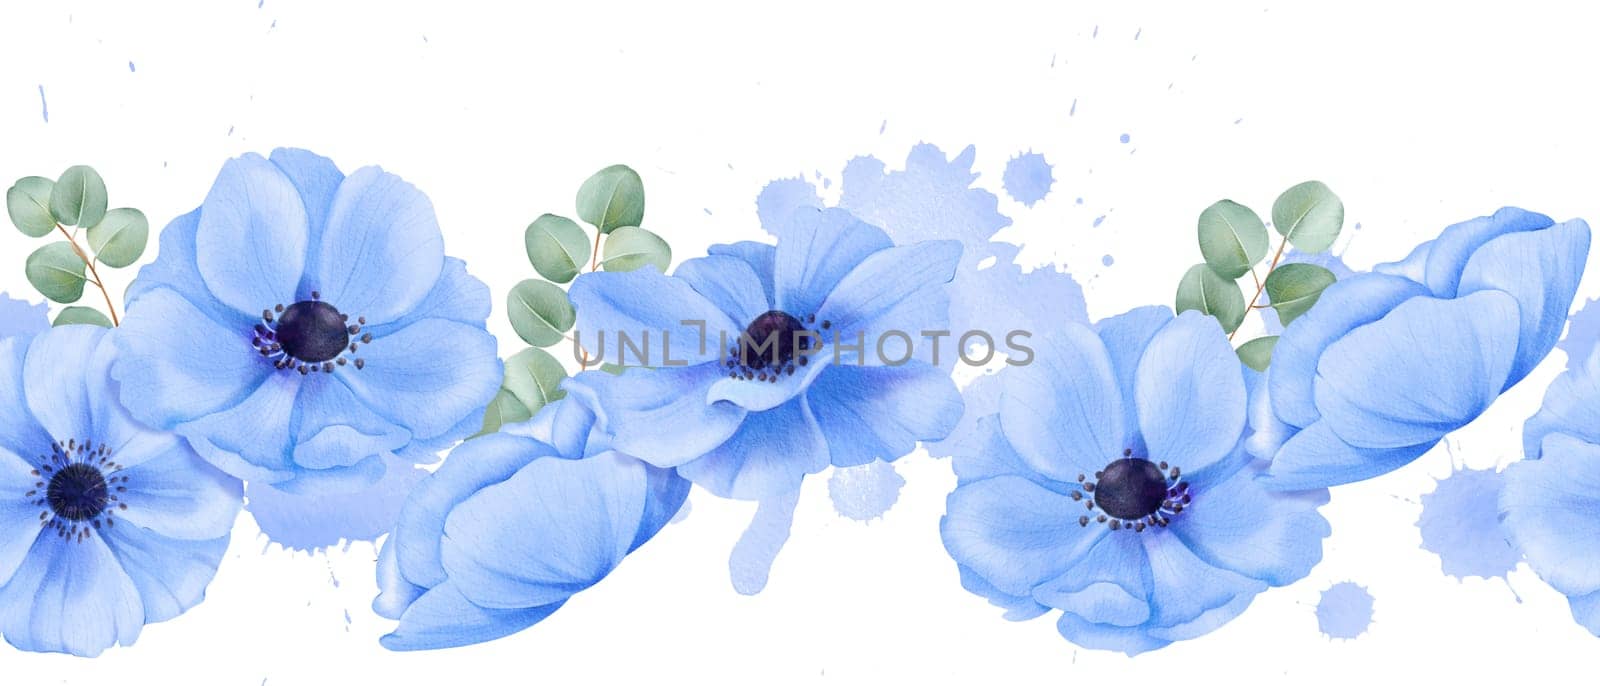 A seamless border featuring delicate blue anemones and eucalyptus leaves. watercolor illustration for digital backgrounds, scrapbooking stationery design or social media graphics.